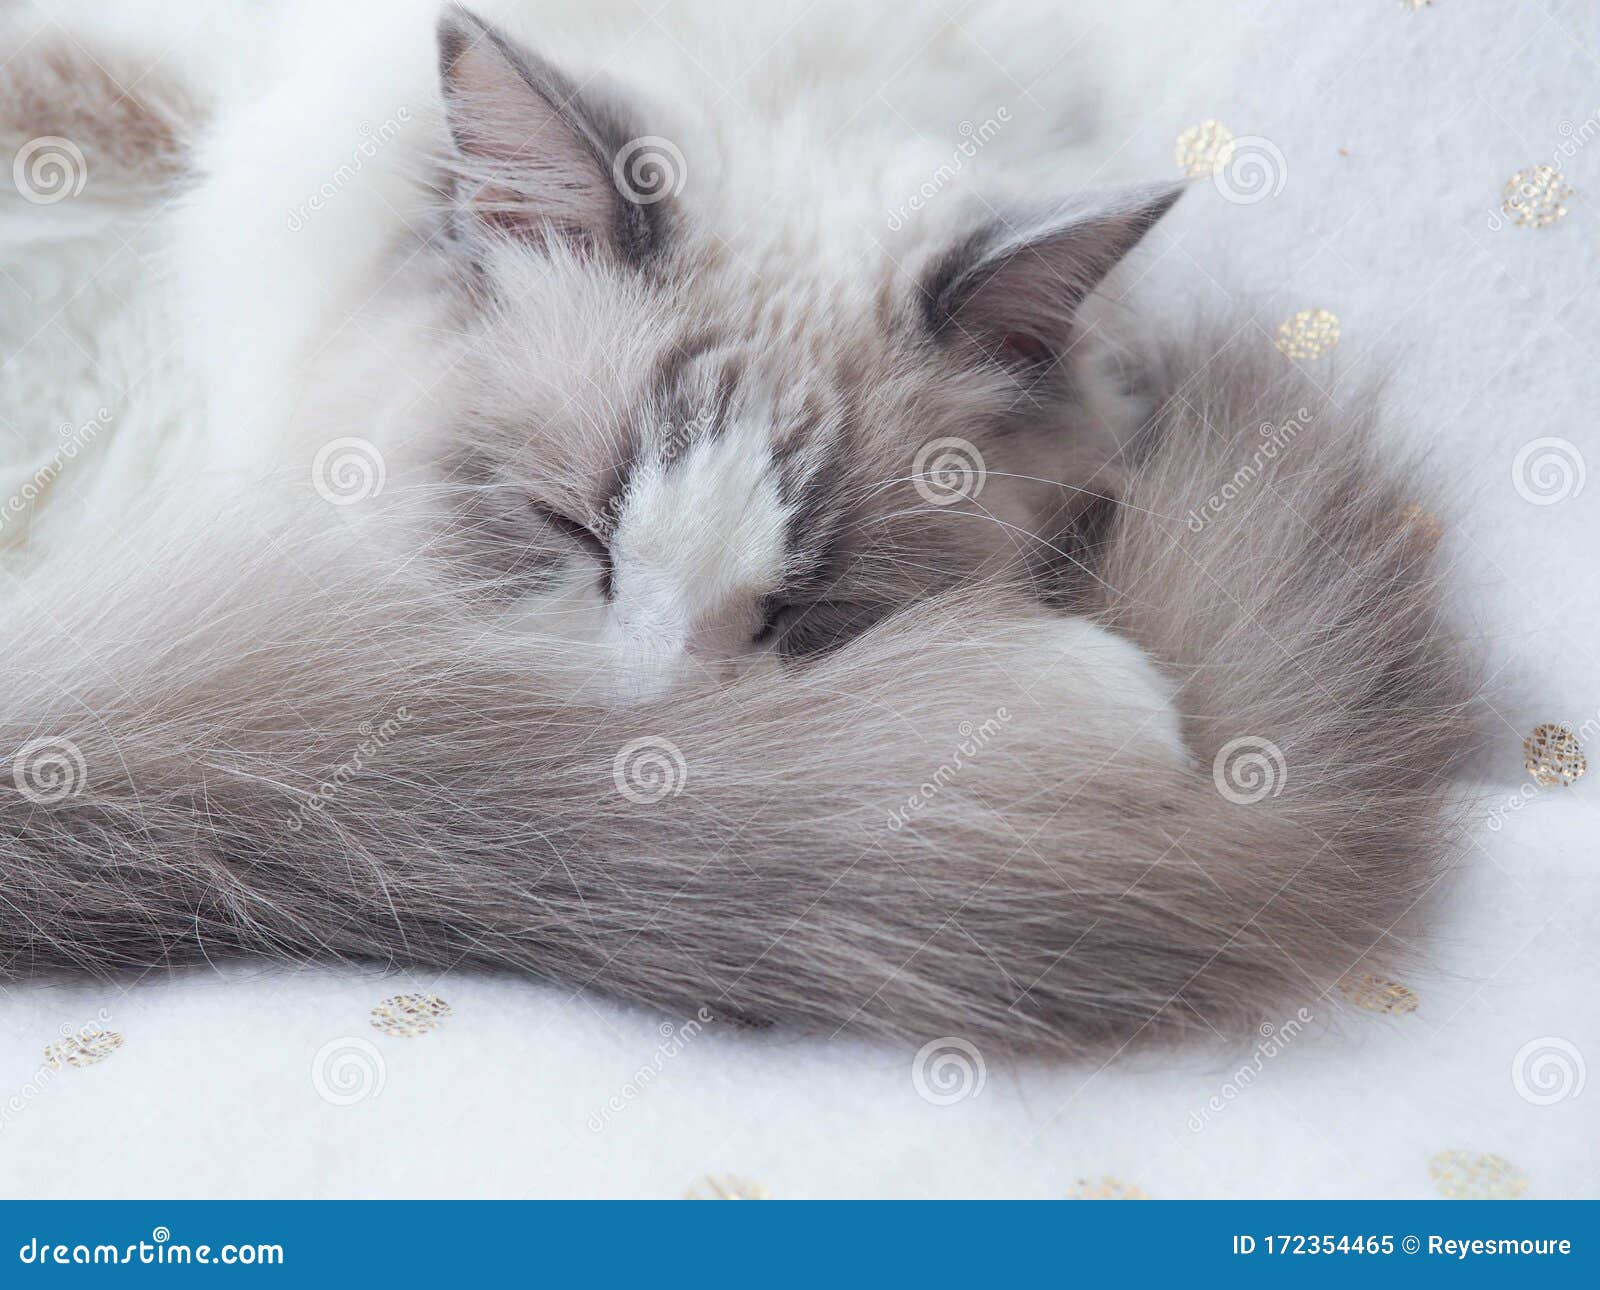 adorable ragdoll cat with fluffy grey tail.